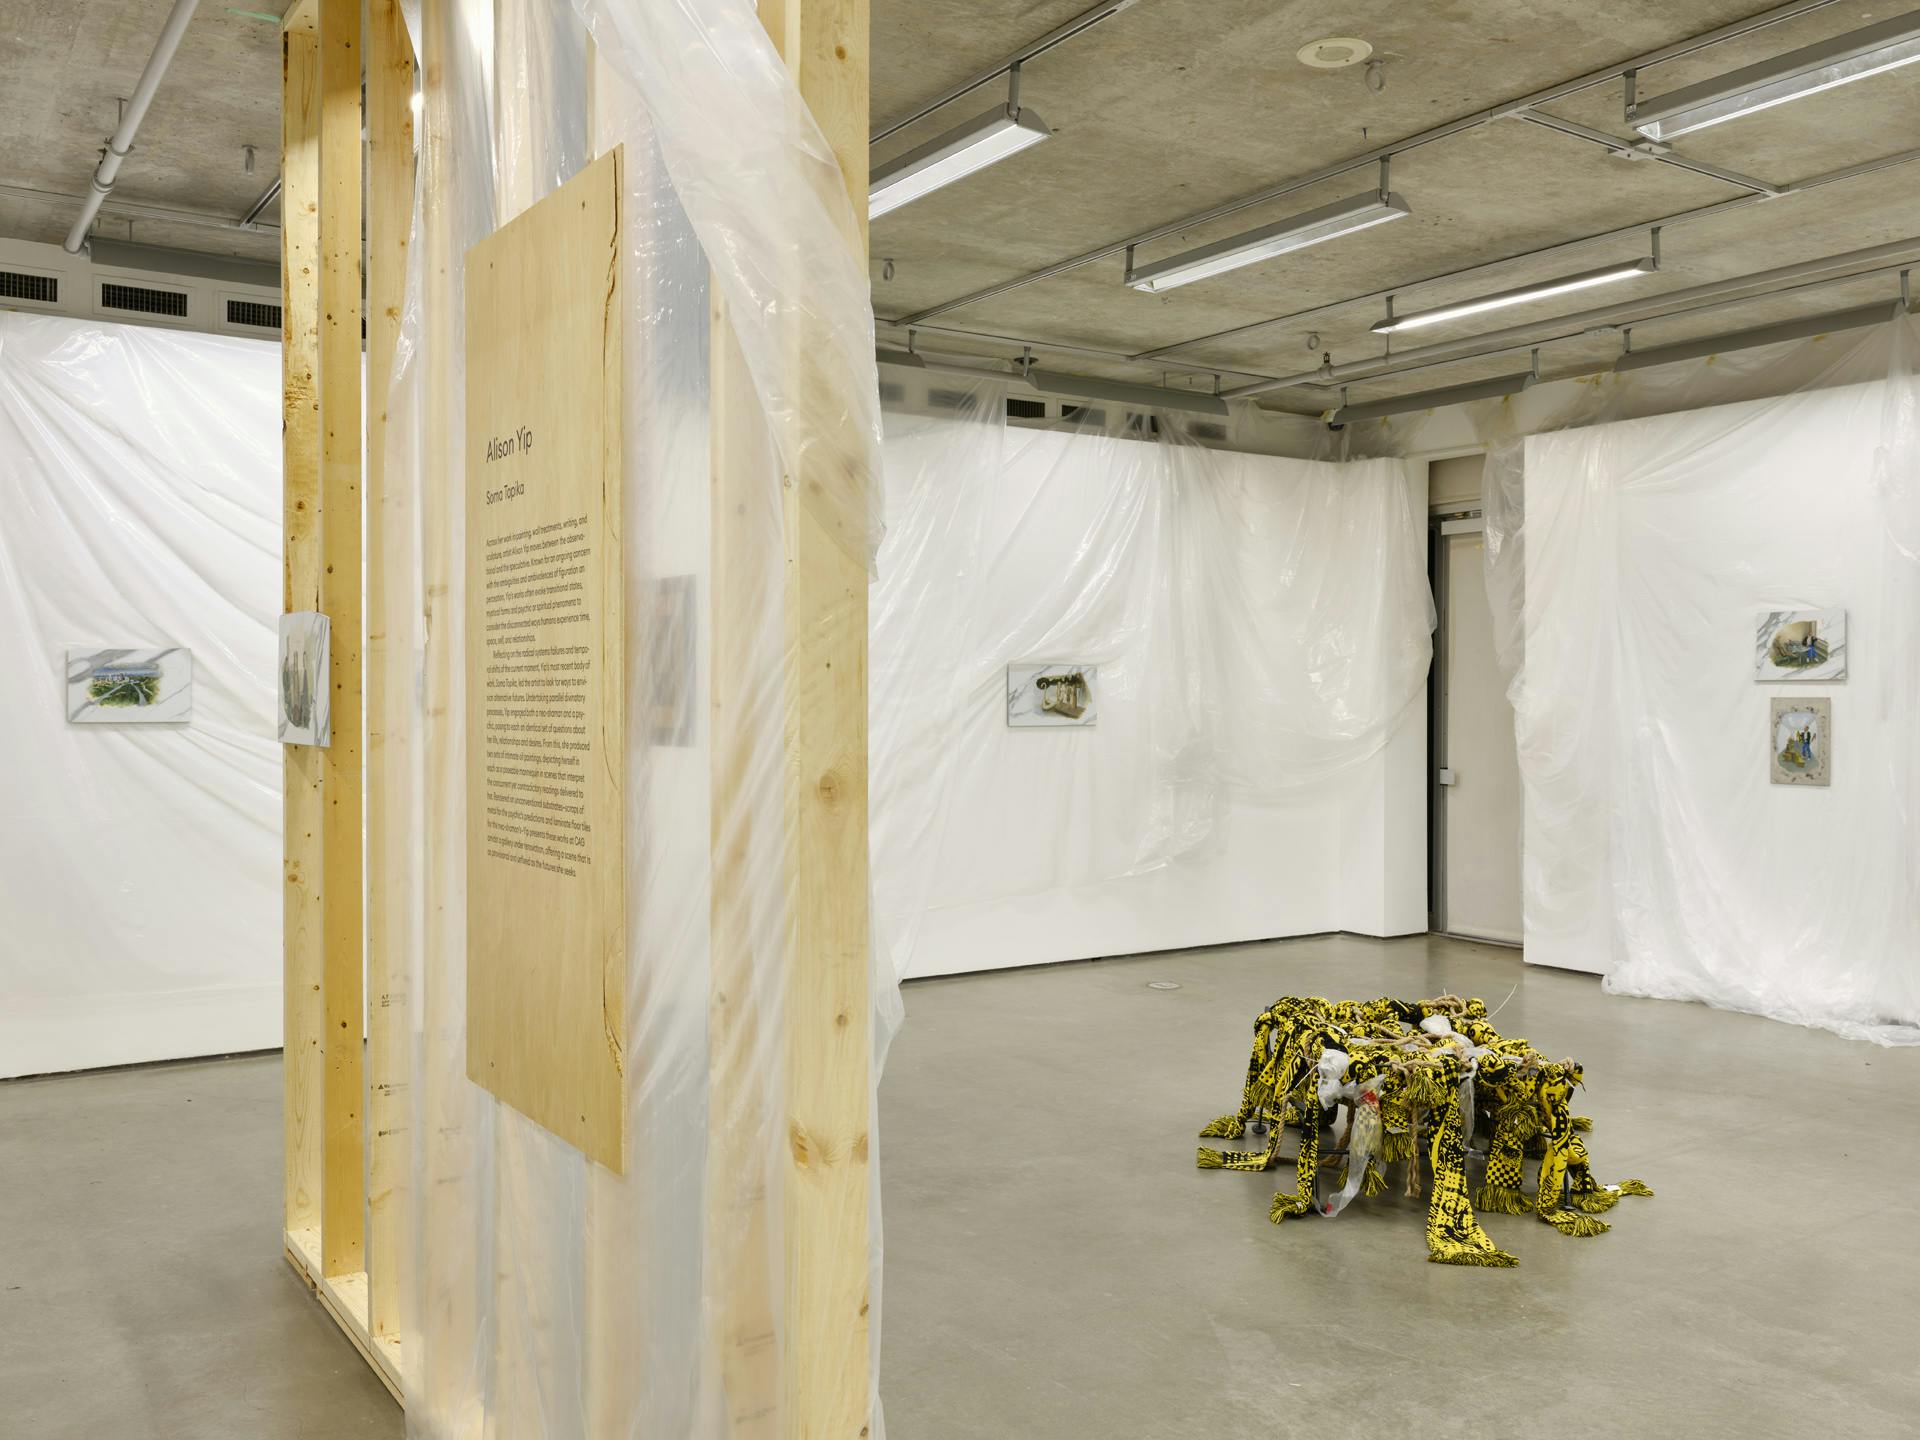  Small paintings hang on gallery walls draped with plastic sheets. An angled view of an unfinished wall structure intersects the view. A sculpture made of textiles, plastic and rope sits on the floor. 